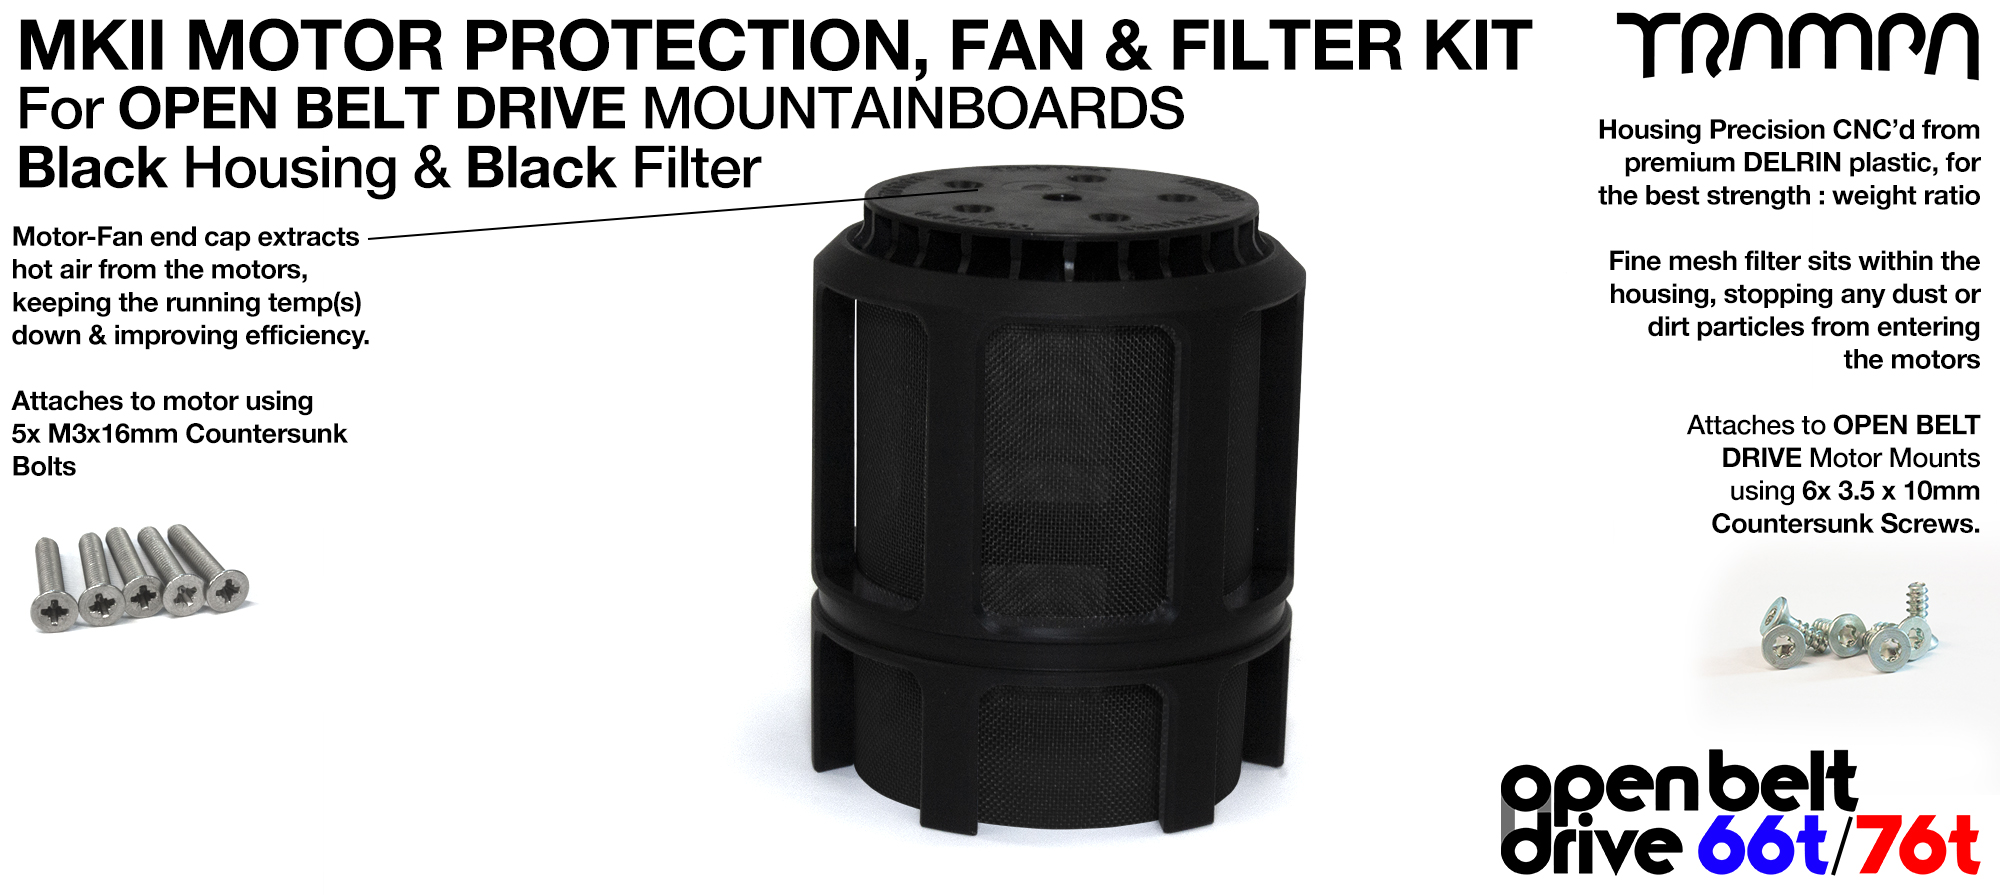 FULL CAGE Motor protection SUPER STRONG DELRIN Plastic includes Fan & BLACK Filter - SINGLE